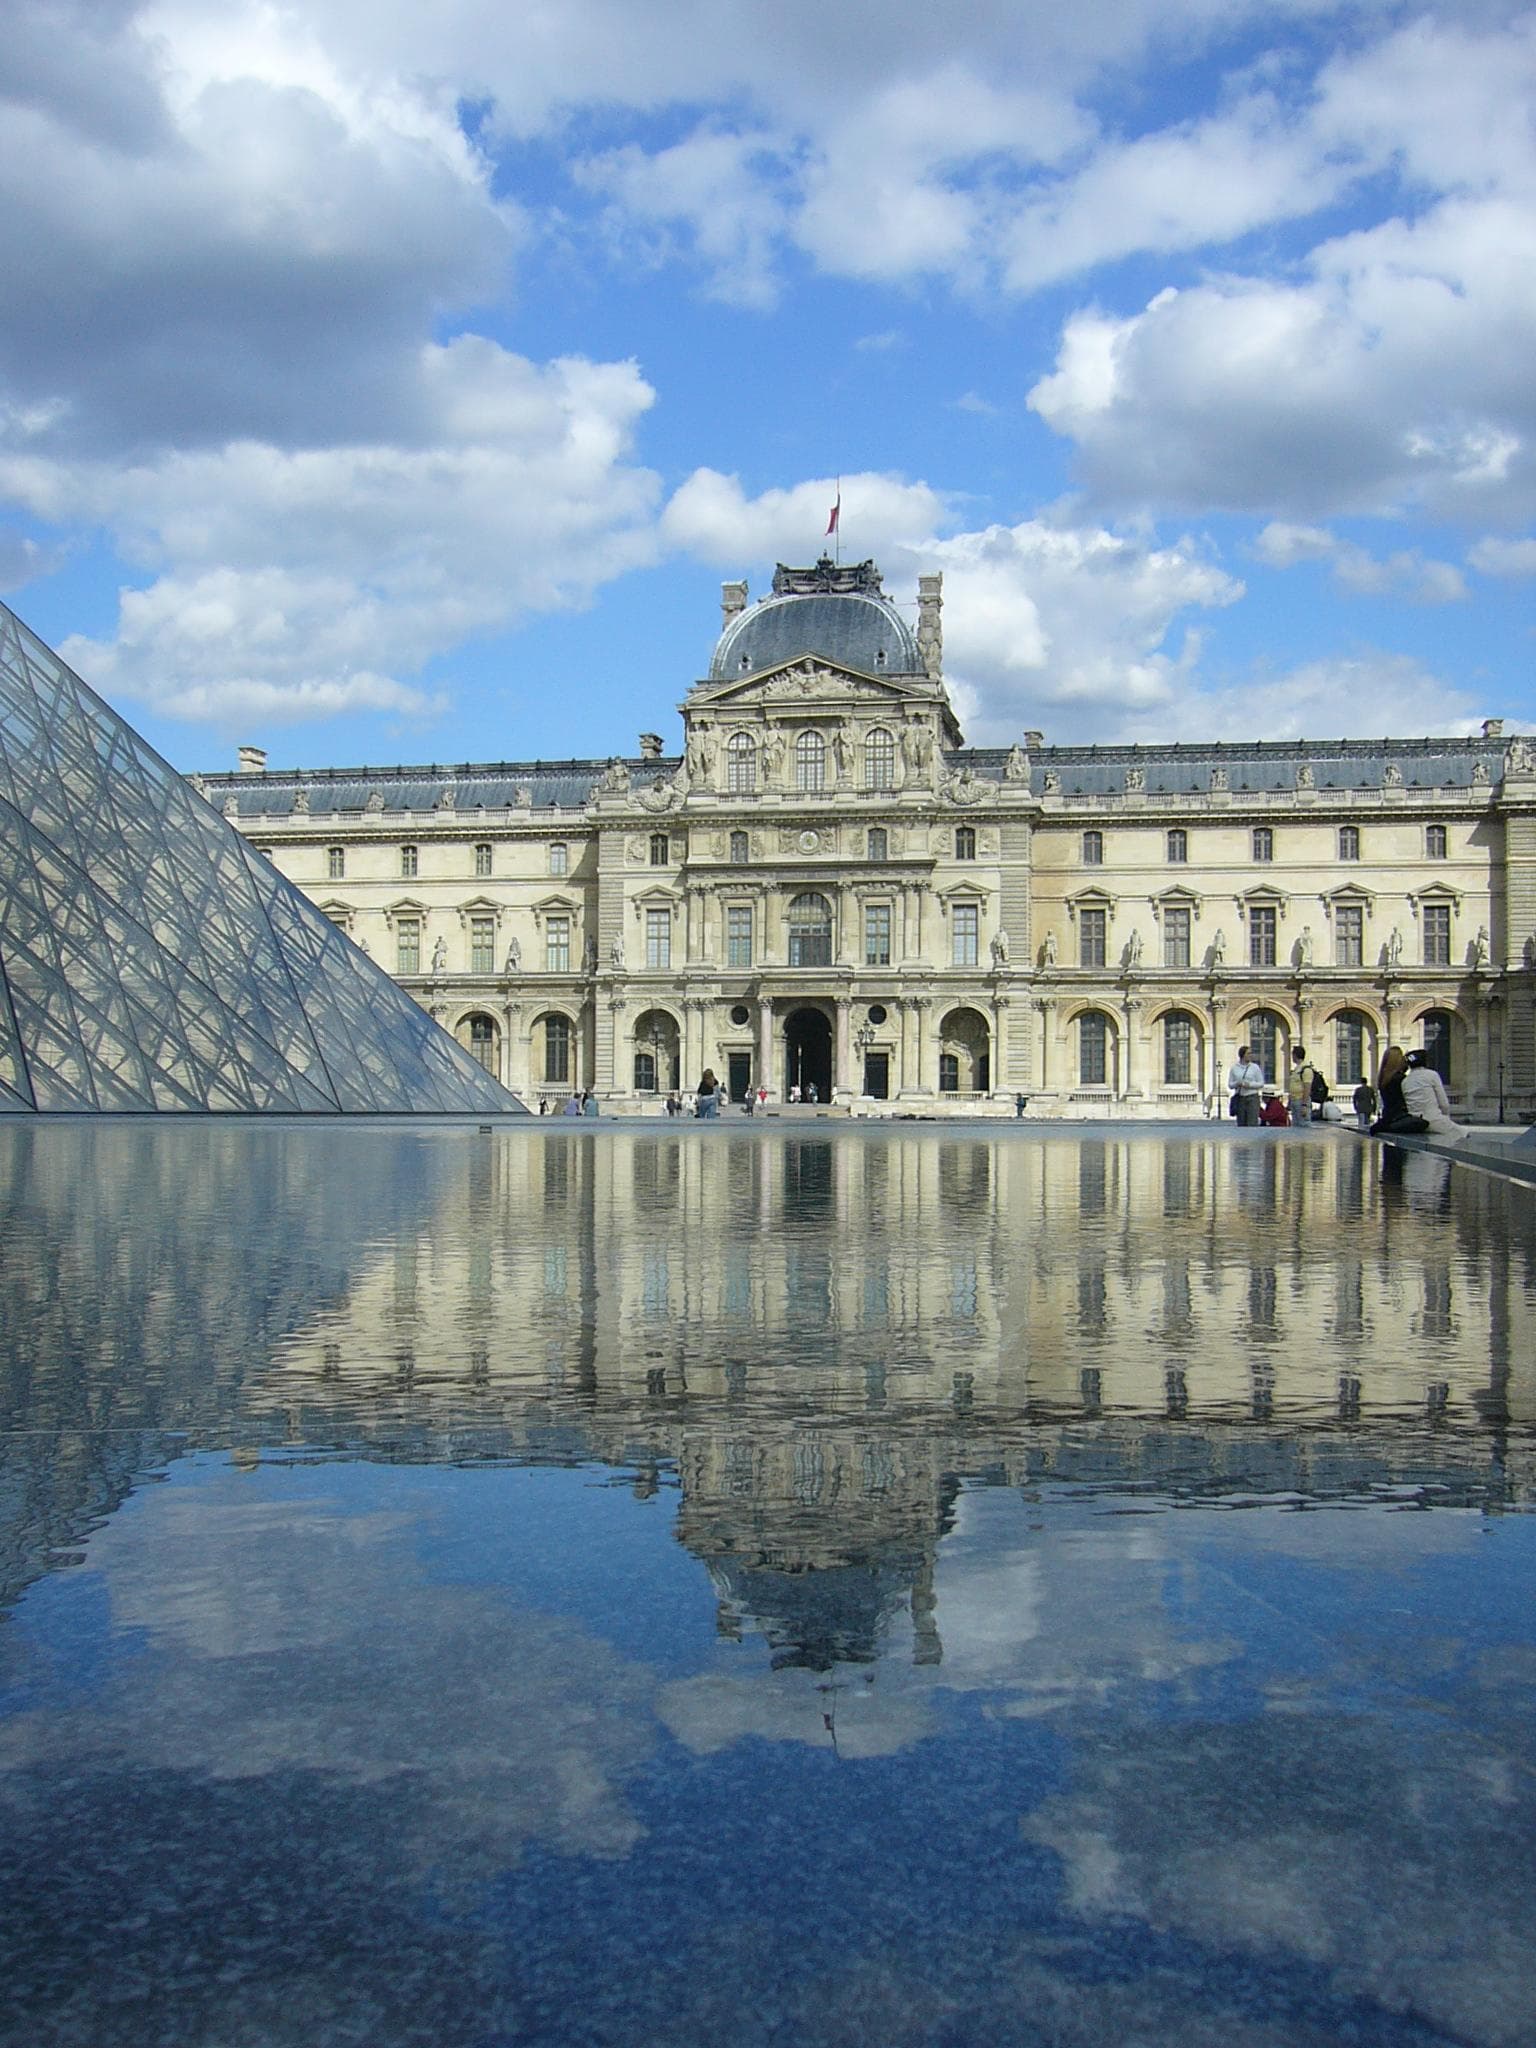 Random Best Museums in the World